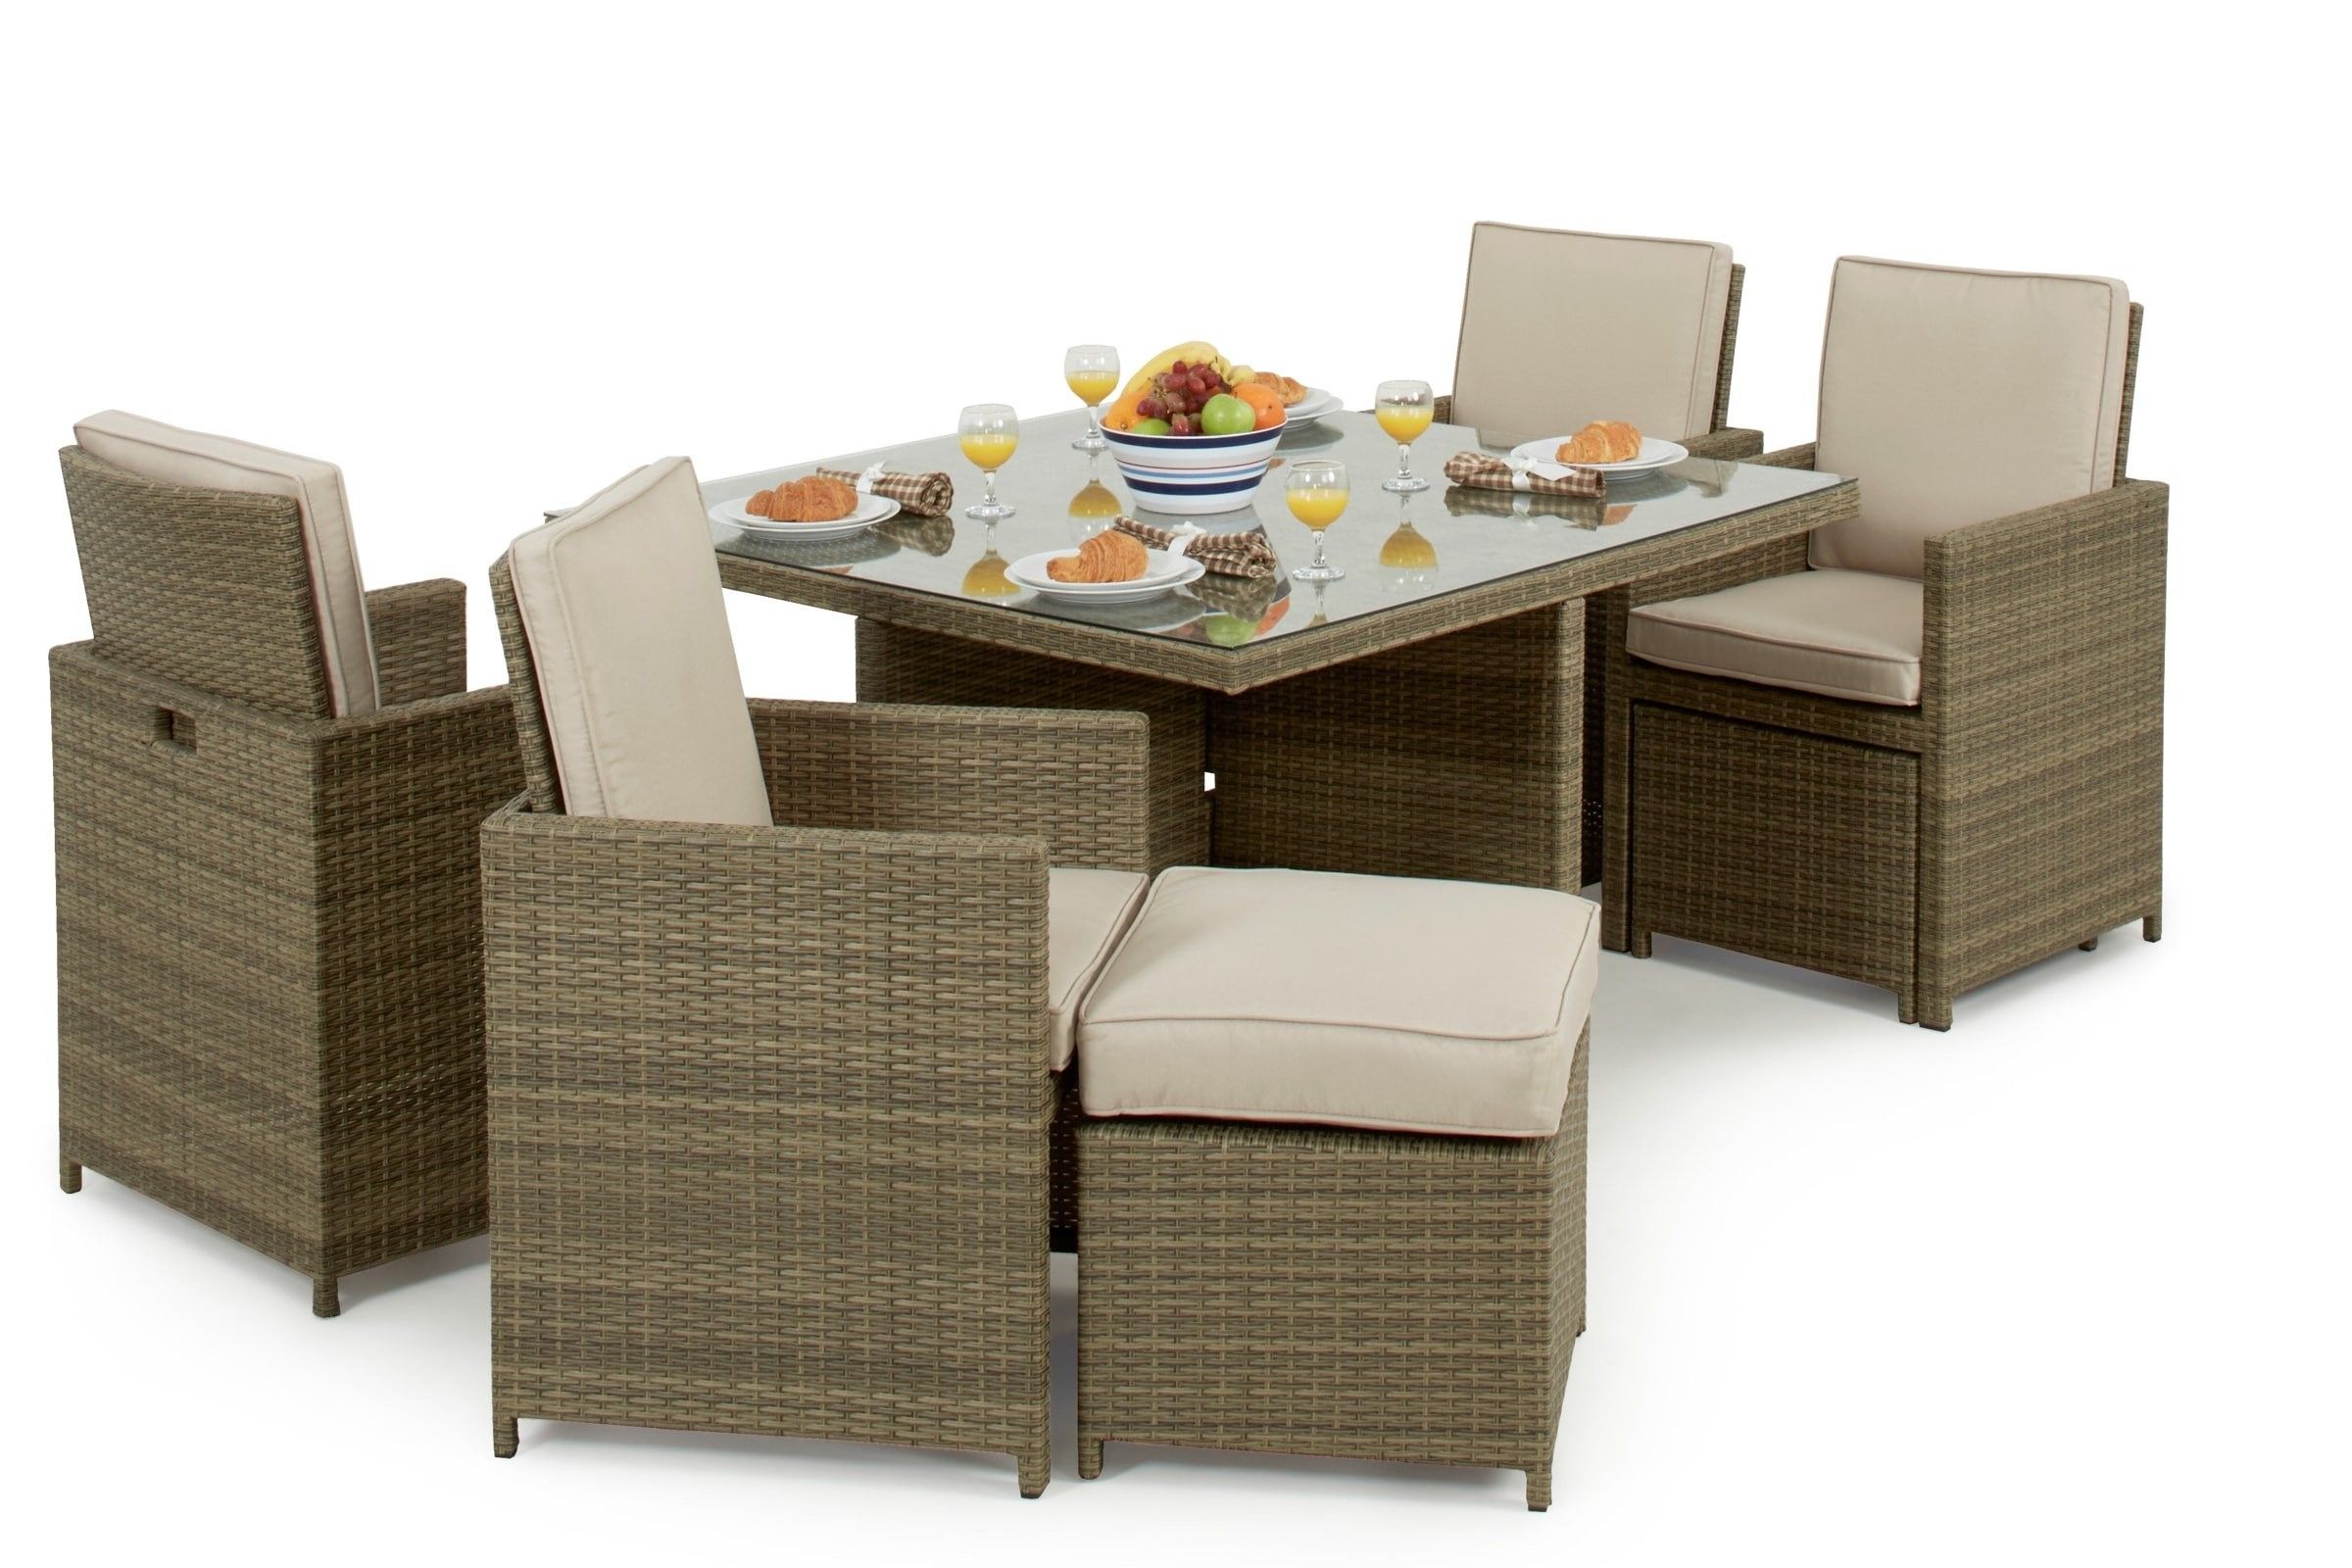 Maze Rattan Tuscany 4 Seat Cube Garden Furniture Set | Rattan Furniture Throughout 5 Piece 4 Seat Outdoor Patio Sets (View 1 of 15)